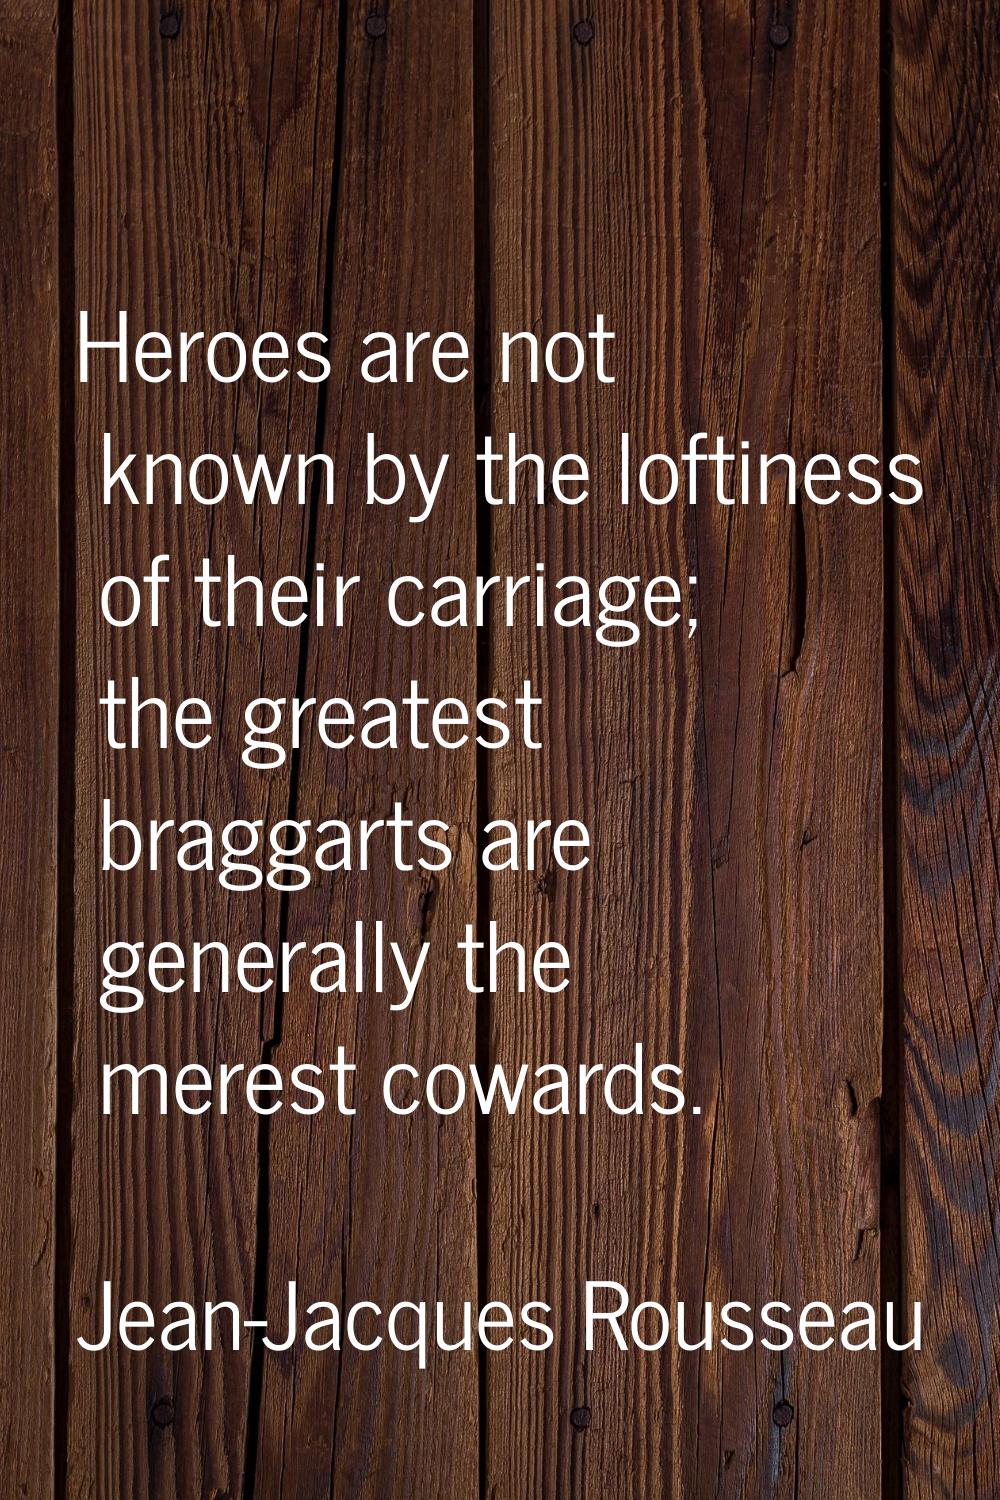 Heroes are not known by the loftiness of their carriage; the greatest braggarts are generally the m